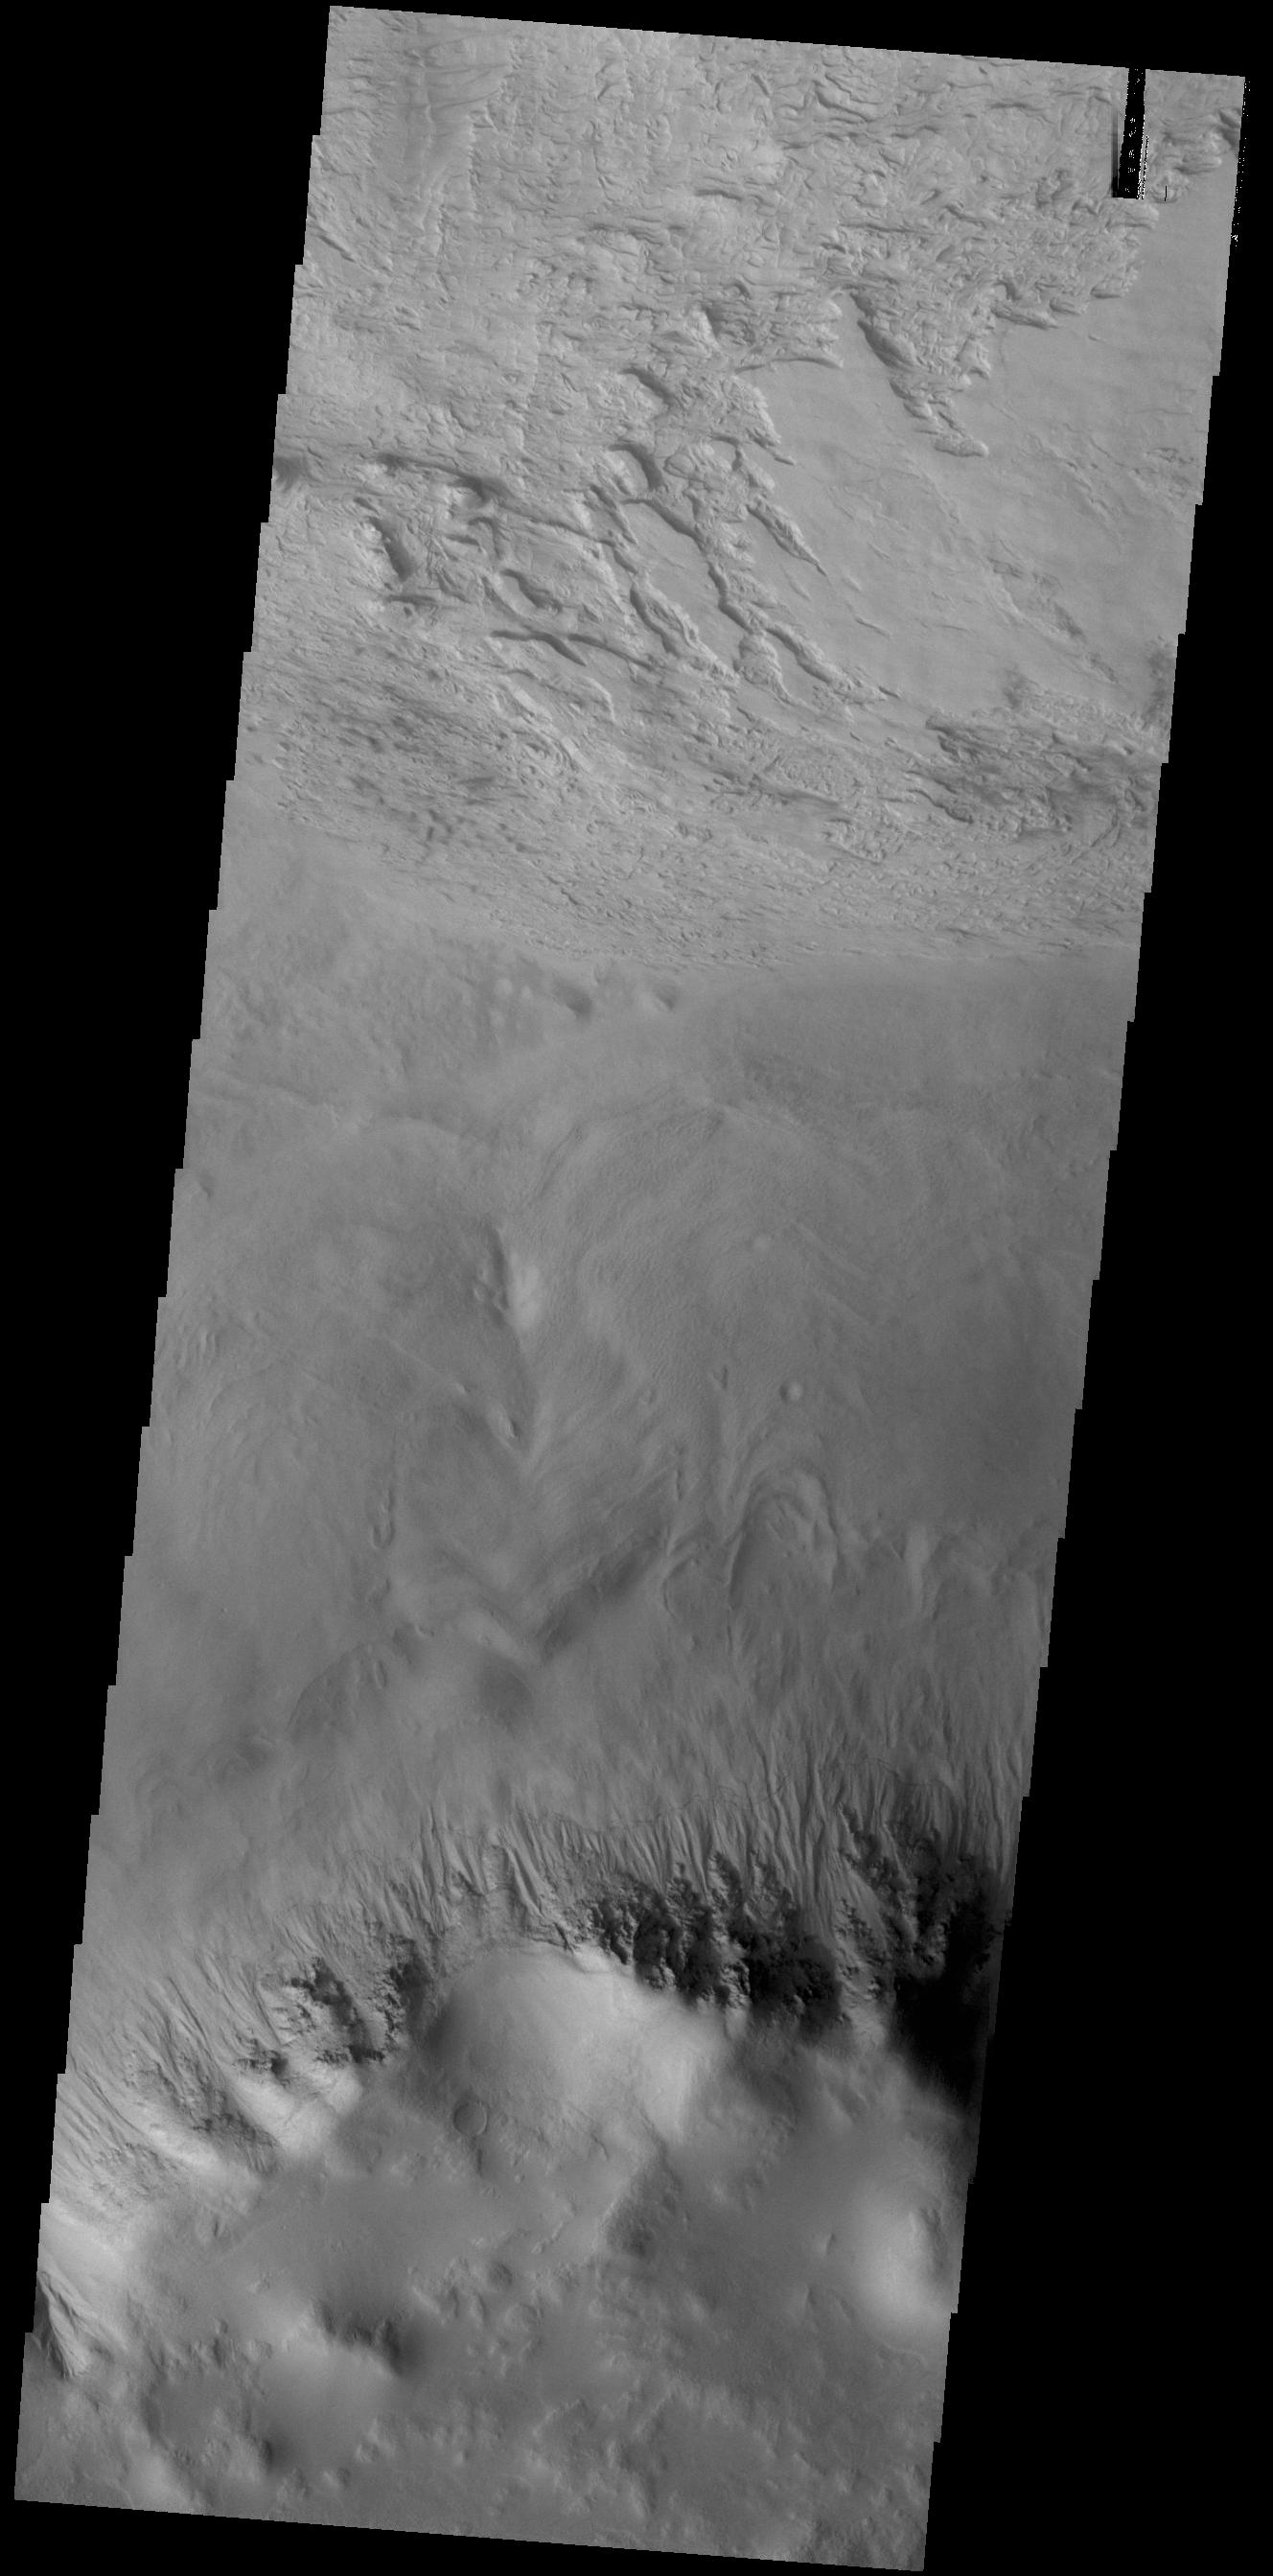 PIA22884: Galle Crater